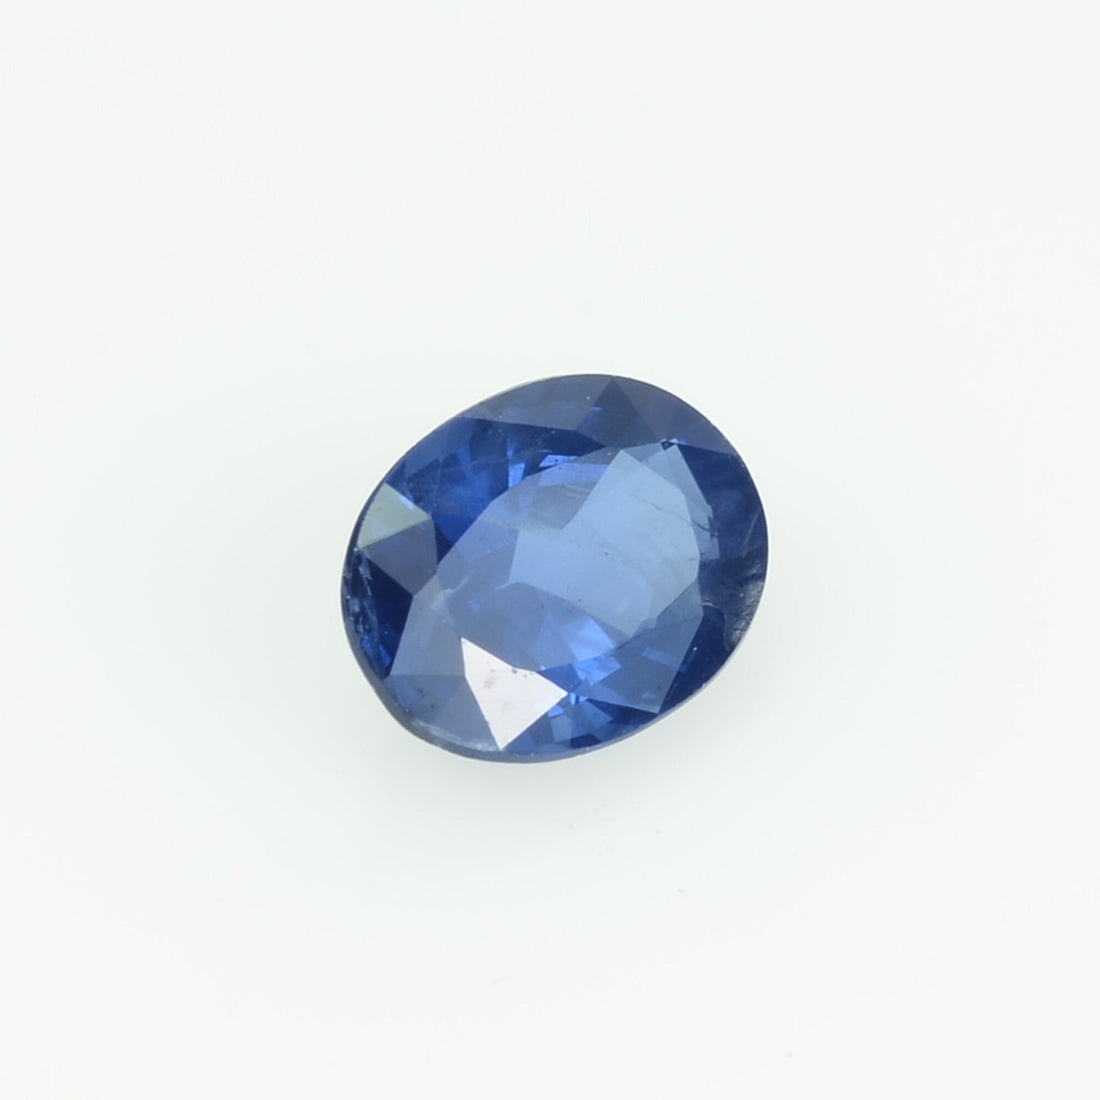 0.85 Cts Natural Blue Sapphire Loose Gemstone Oval Cut